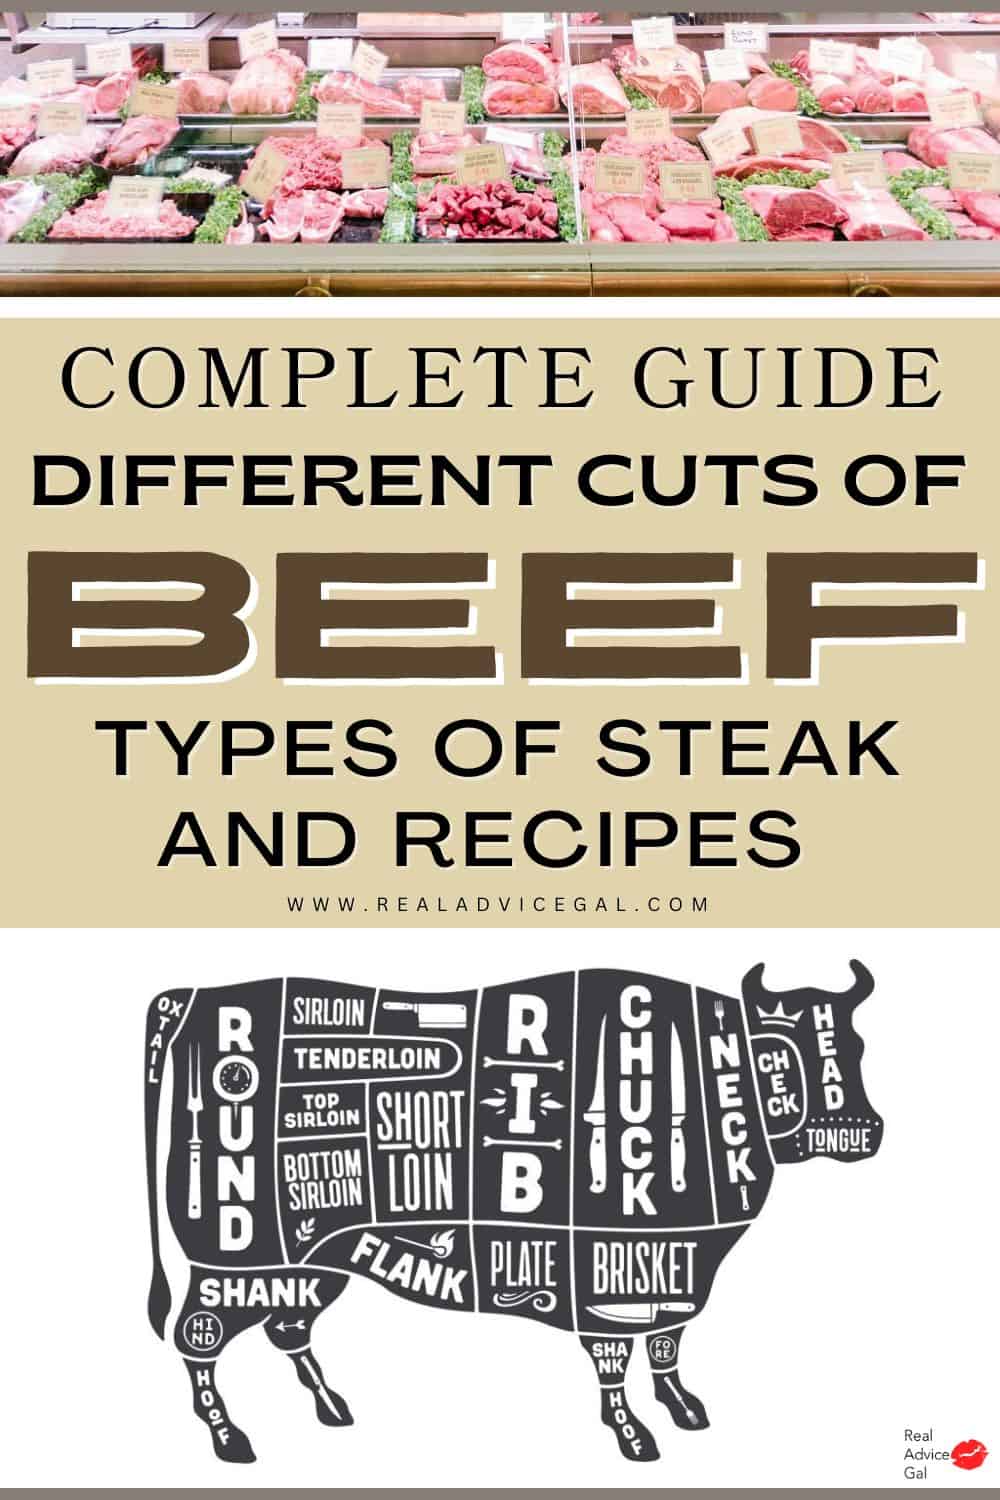 All about different cuts of beef and recipes